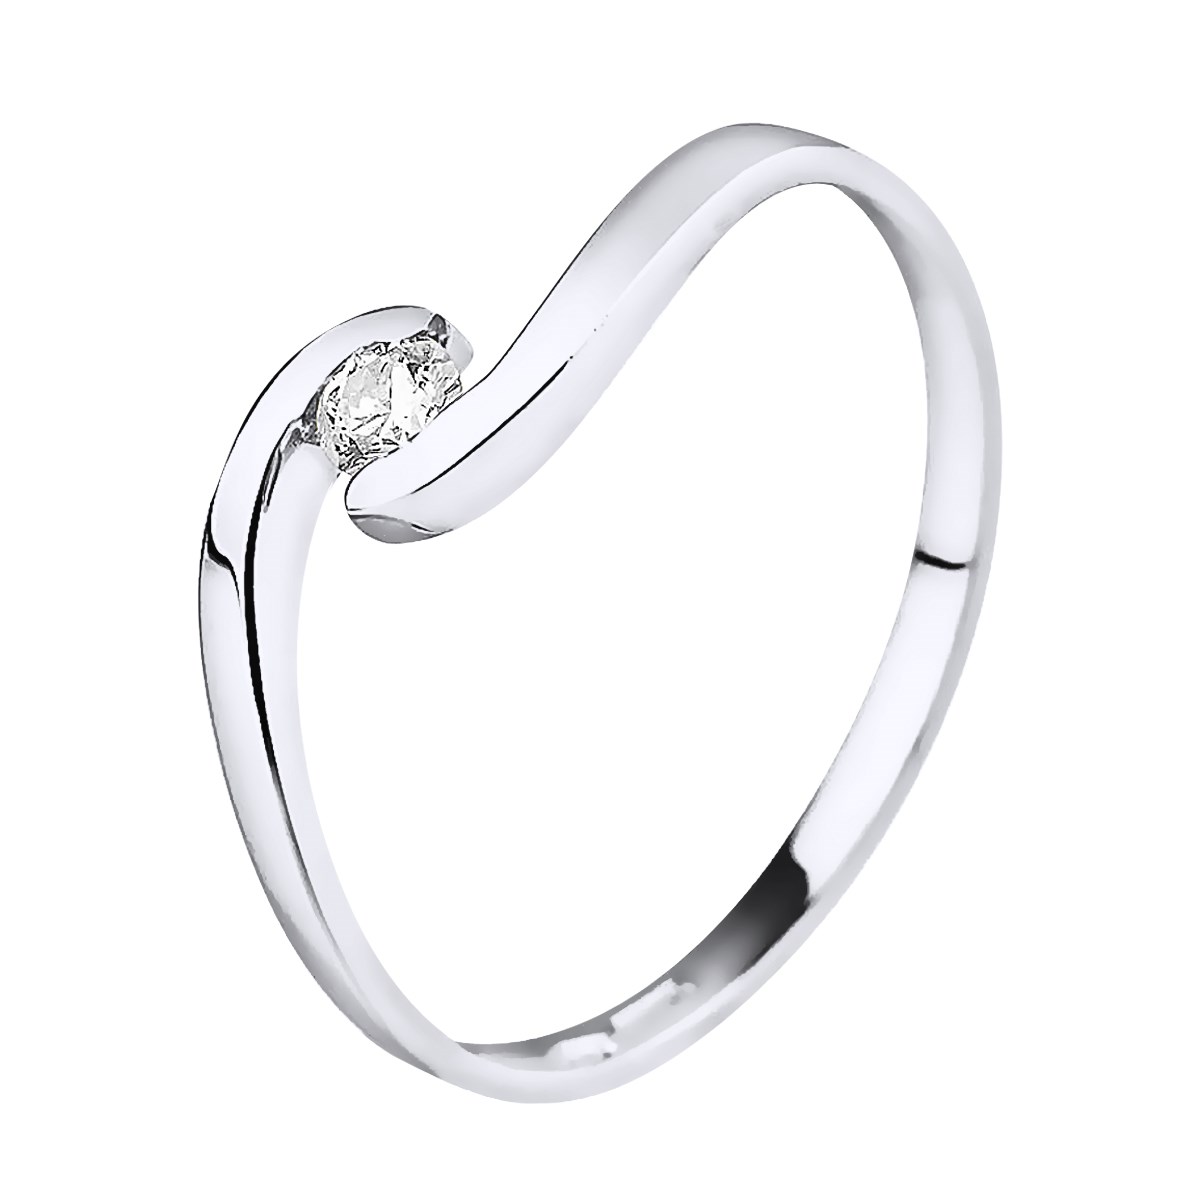 Solitaire Diamant 0,080 Cts Or Blanc 18 Carats